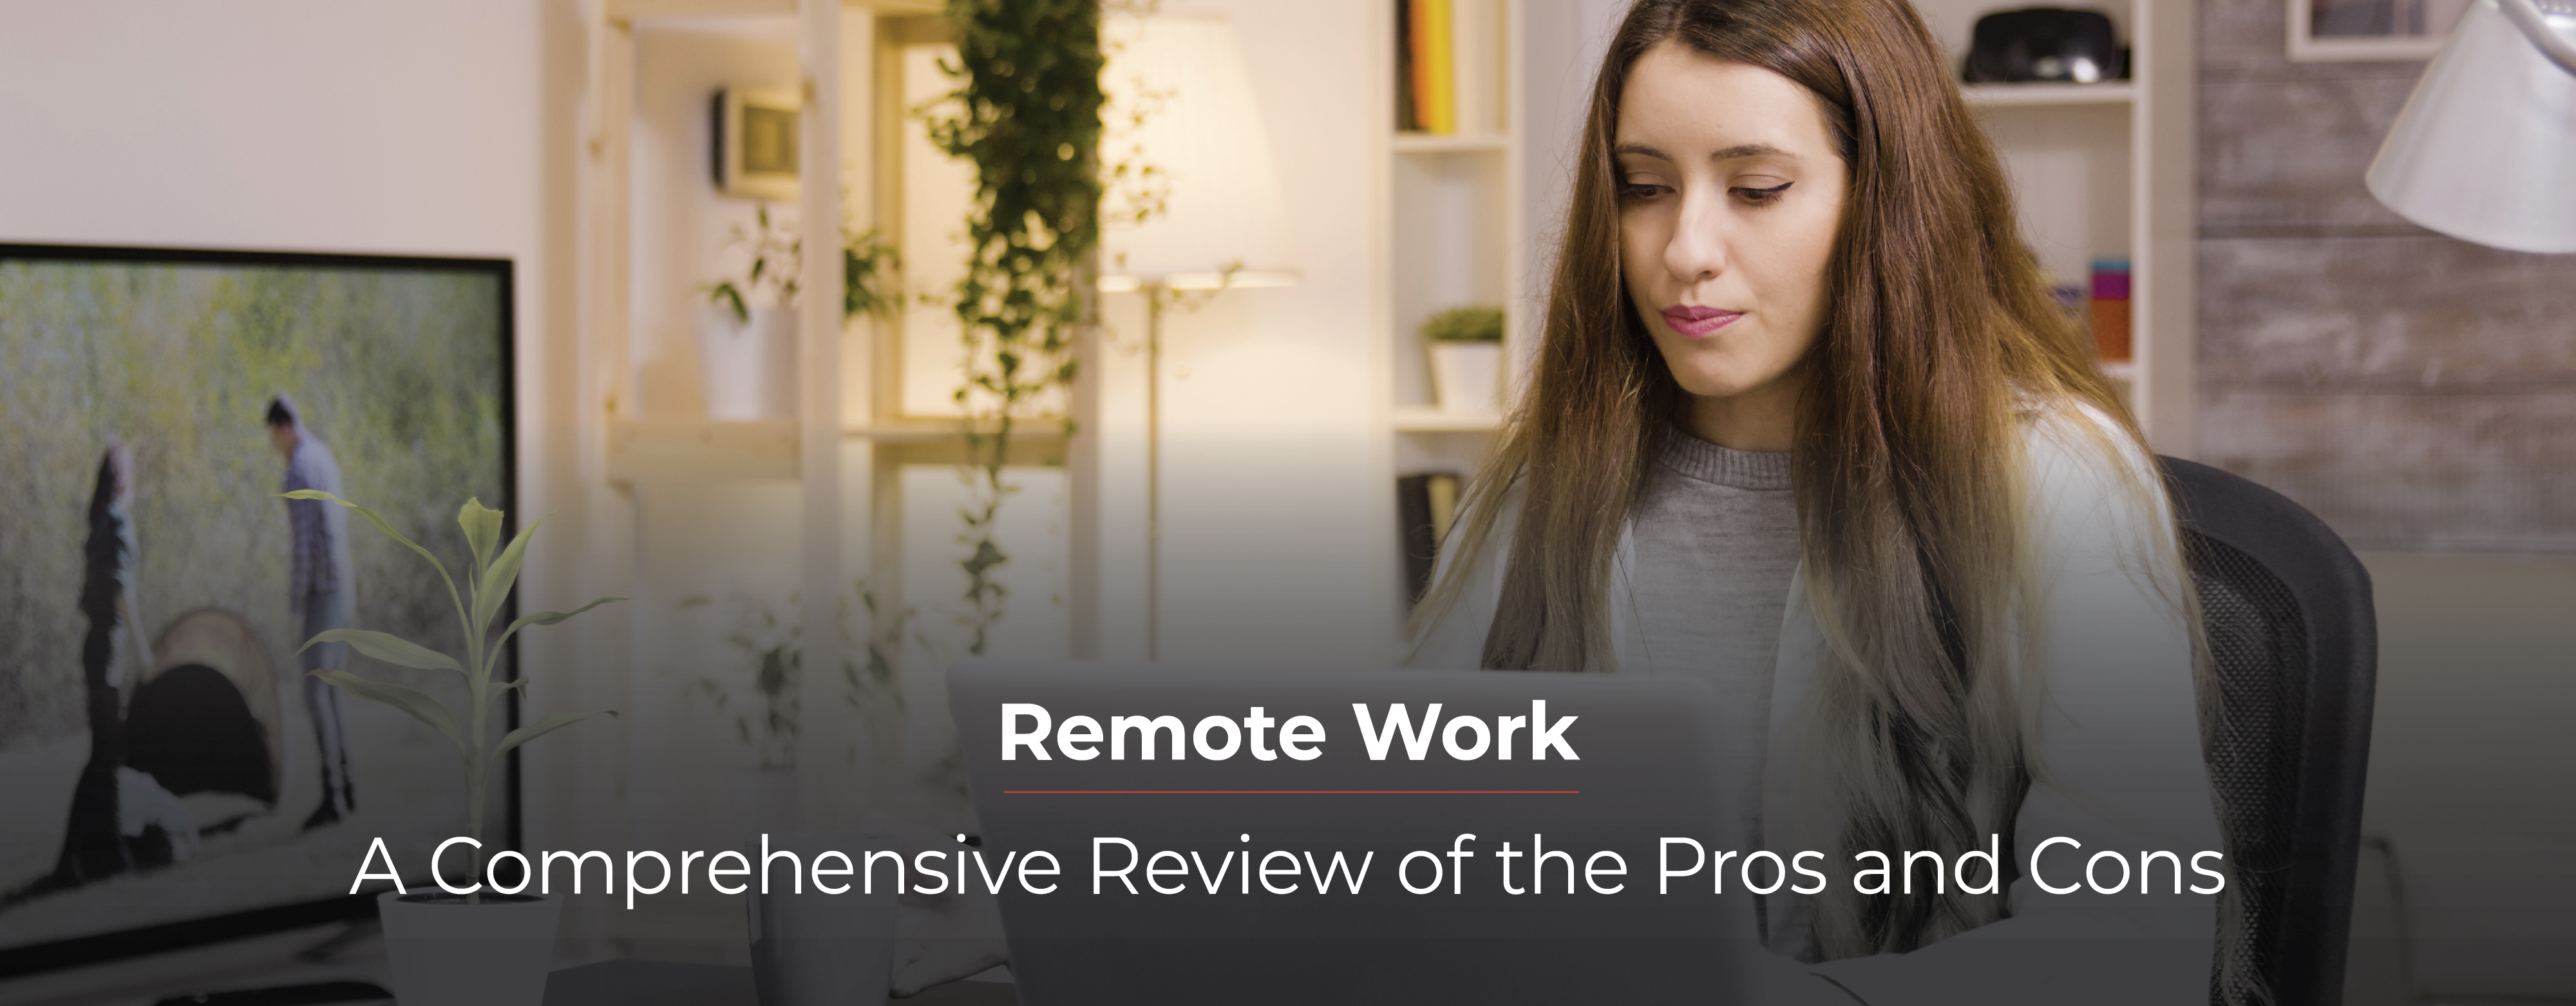 Remote Work: A Comprehensive Review of the Pros and Cons